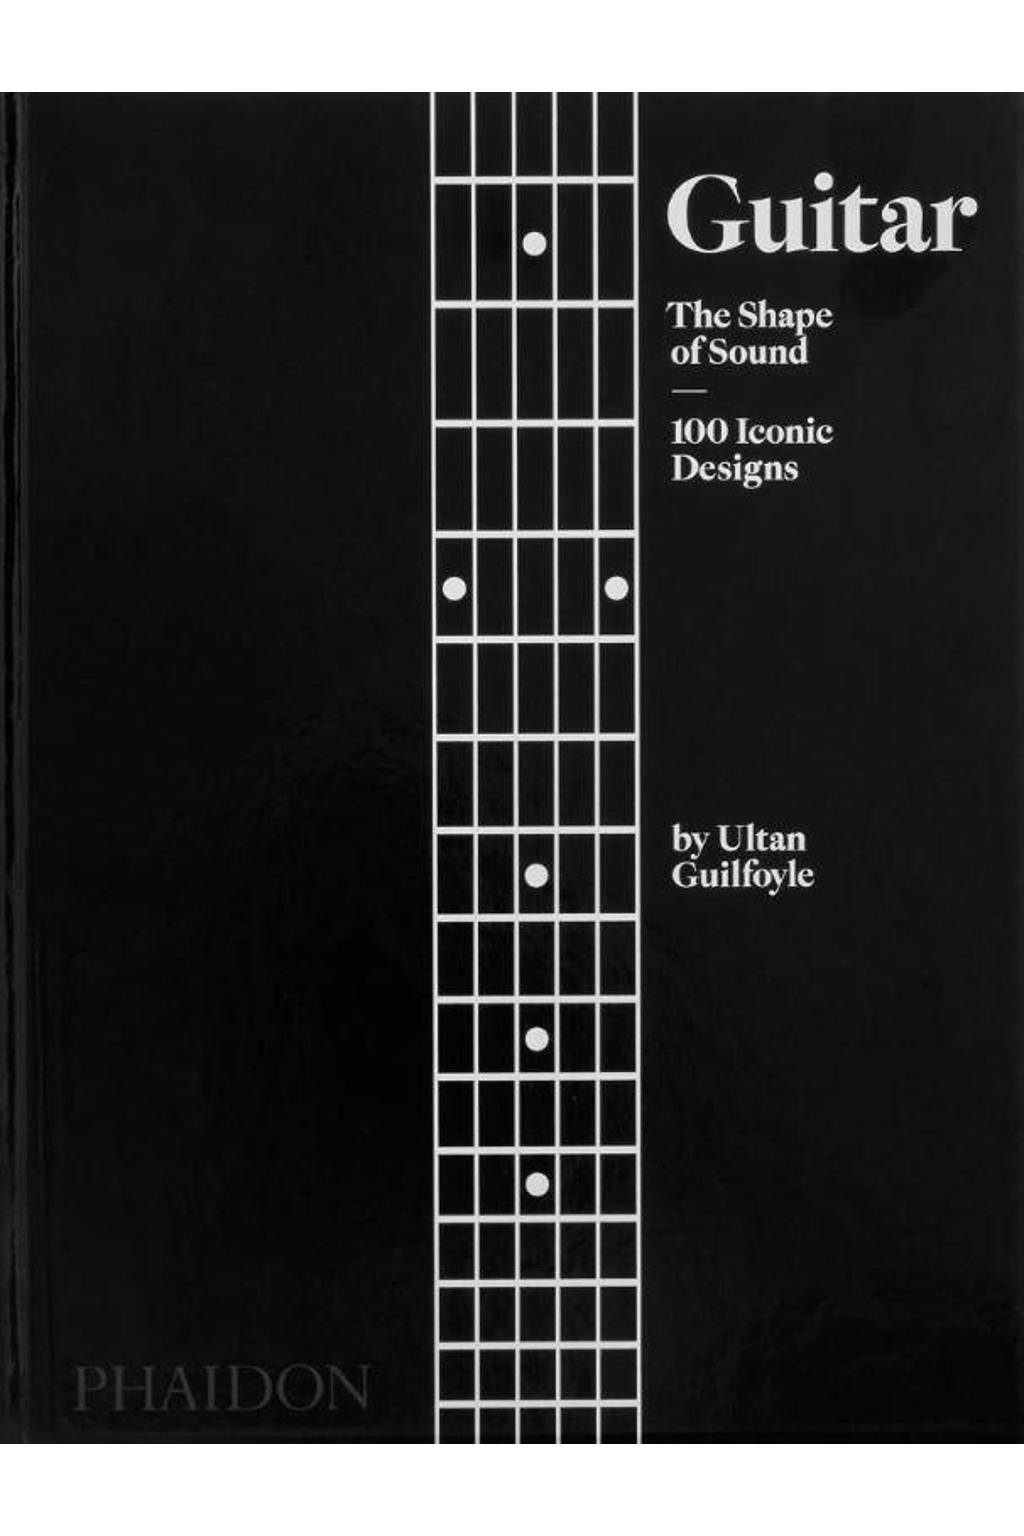 Guitar, The Shape of Sound, 100 Iconic Designs - Ultan Guilfoyle